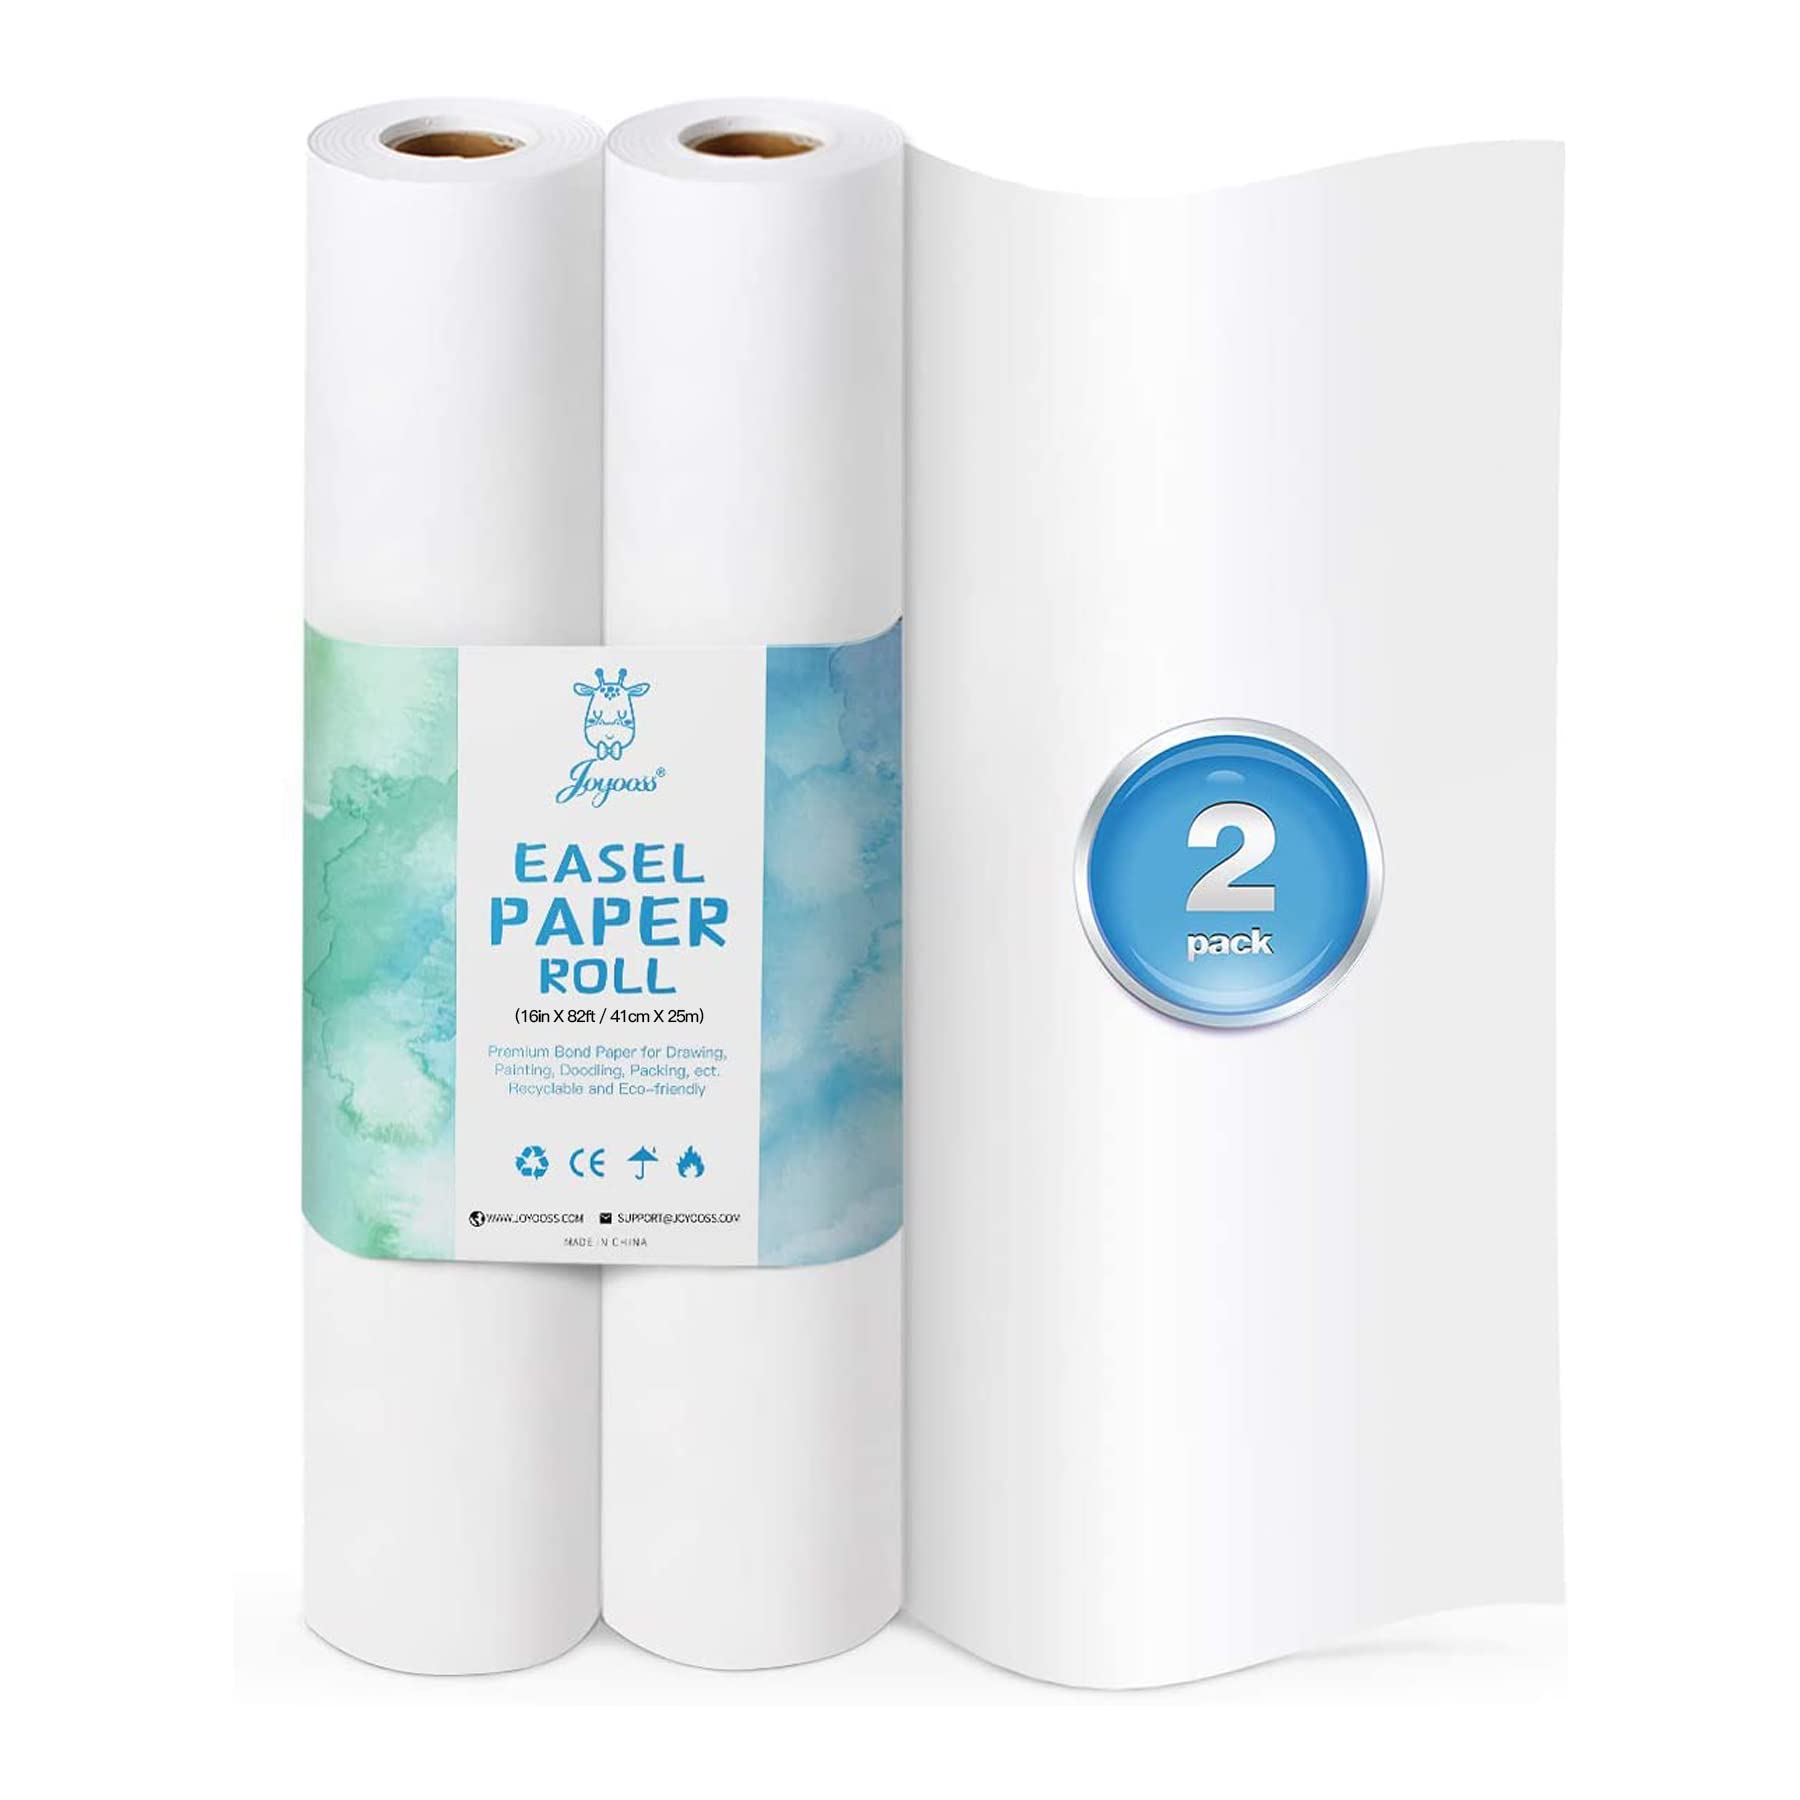 Joyooss Easel Paper Roll, 16 Inches By 82 Feet (2 Pack Total 164 Feet), Art And Craft Paper, Painting Paper For Kids